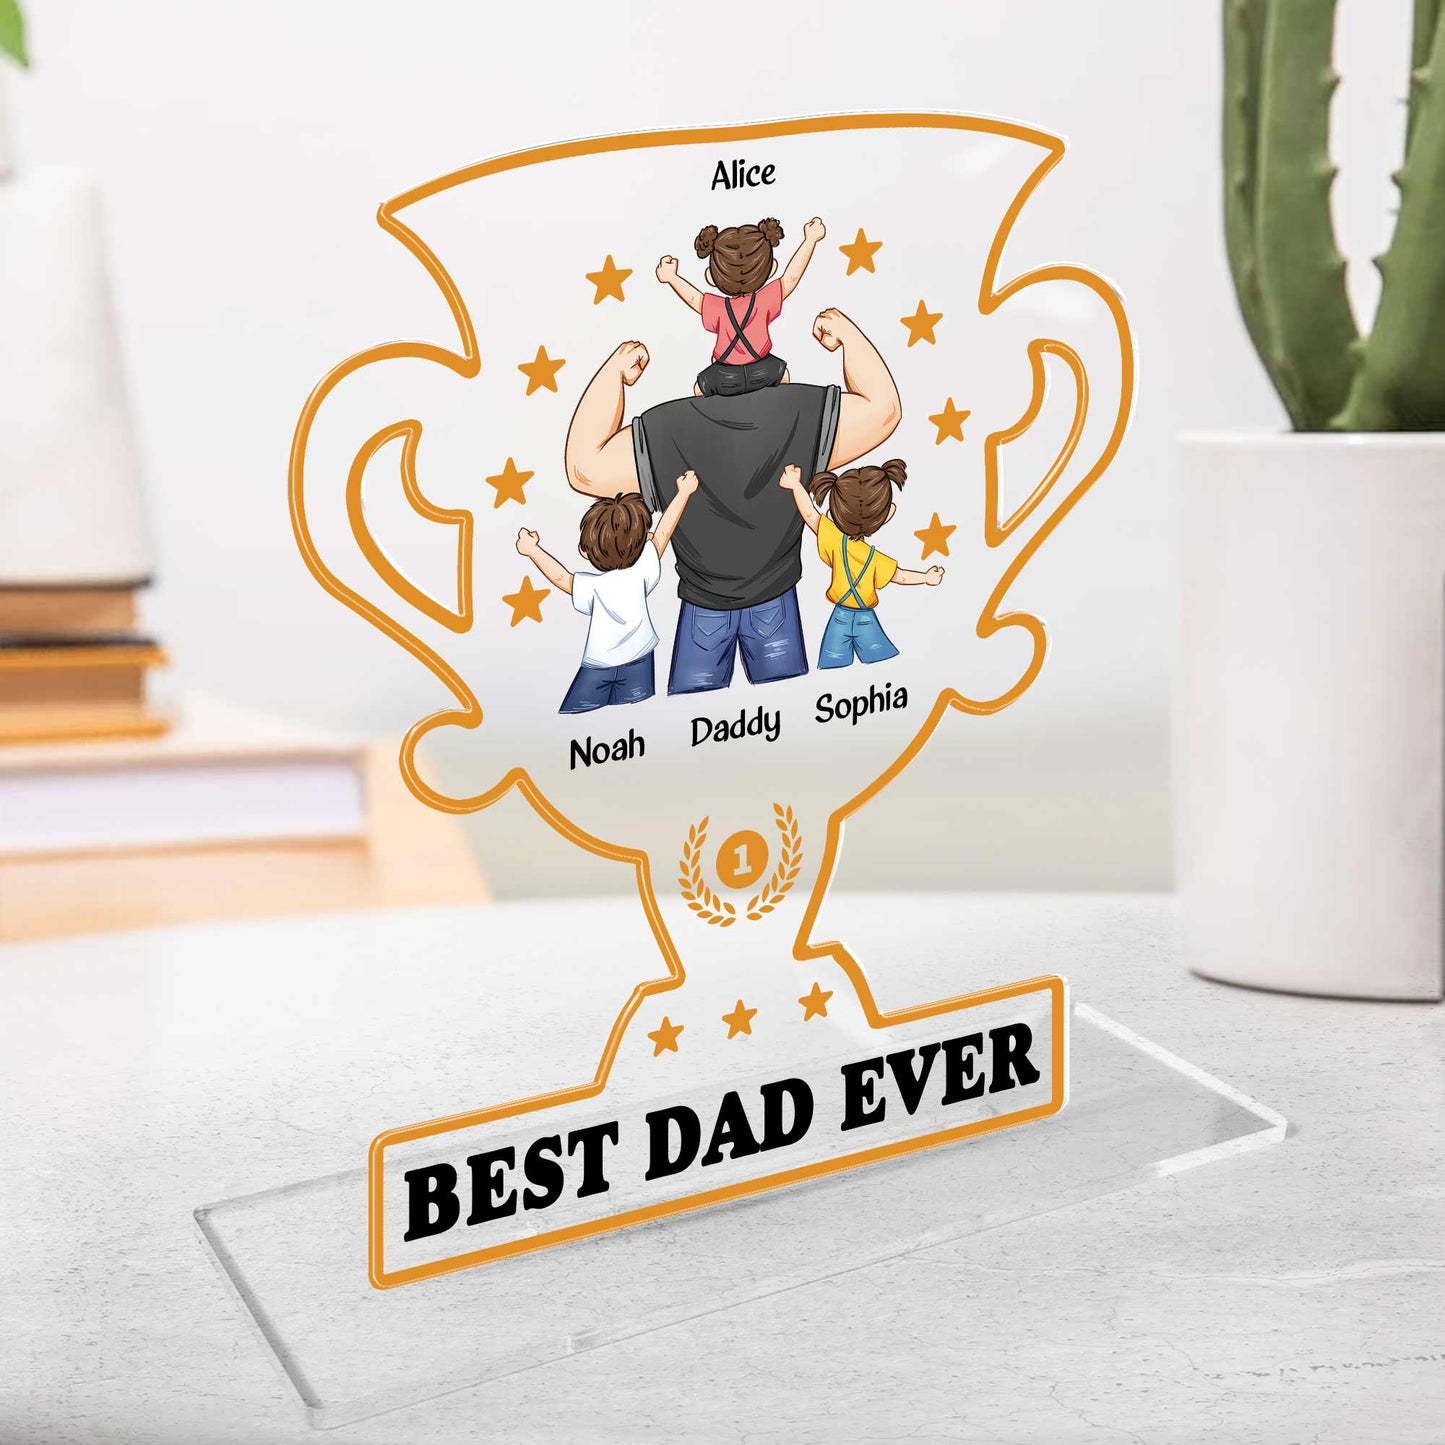 Trophy For The Best Dad - Personalized Acrylic Plaque